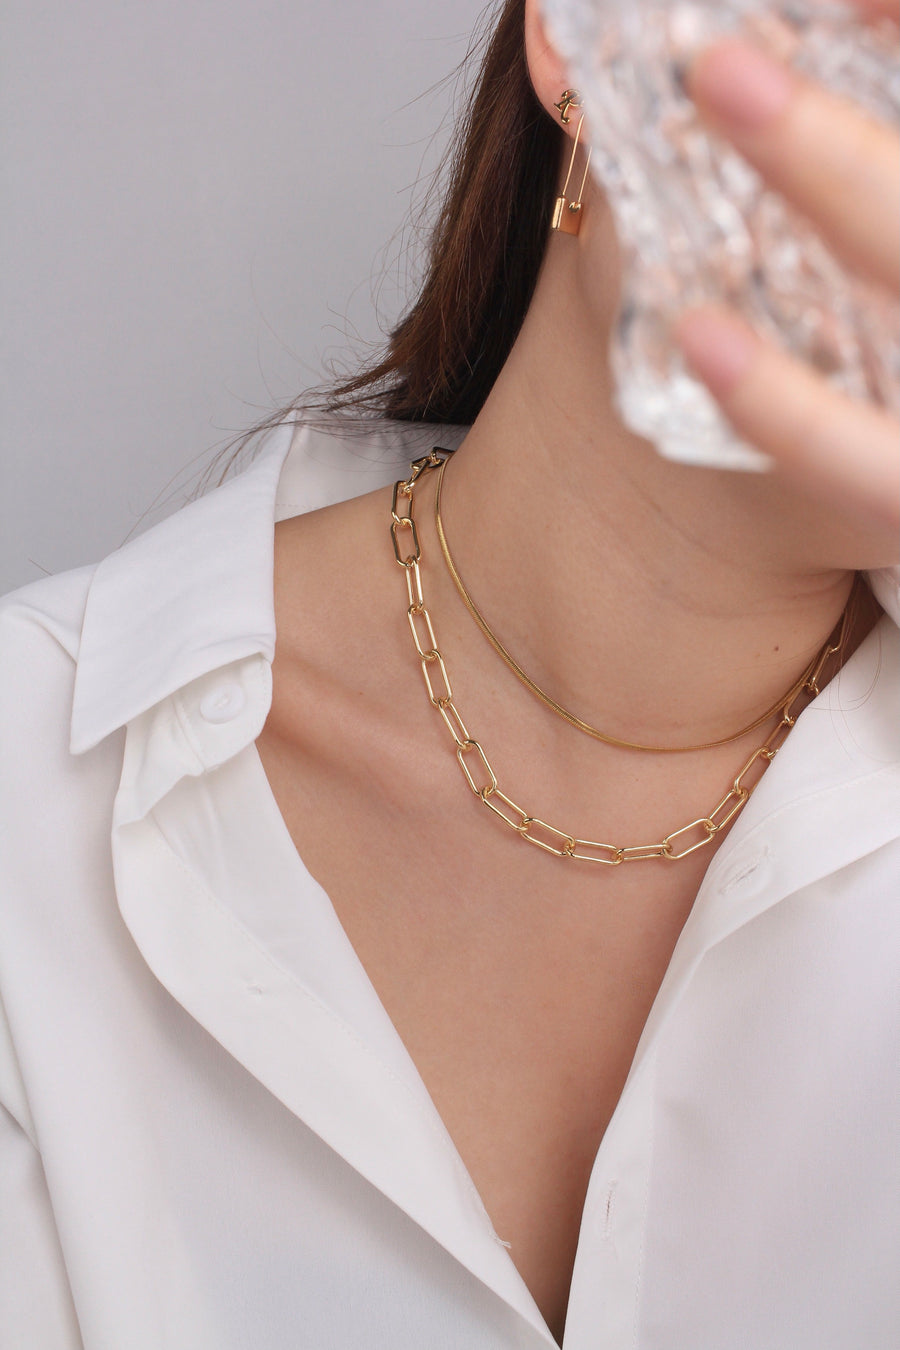 Blake Gold Snake Chain Necklace